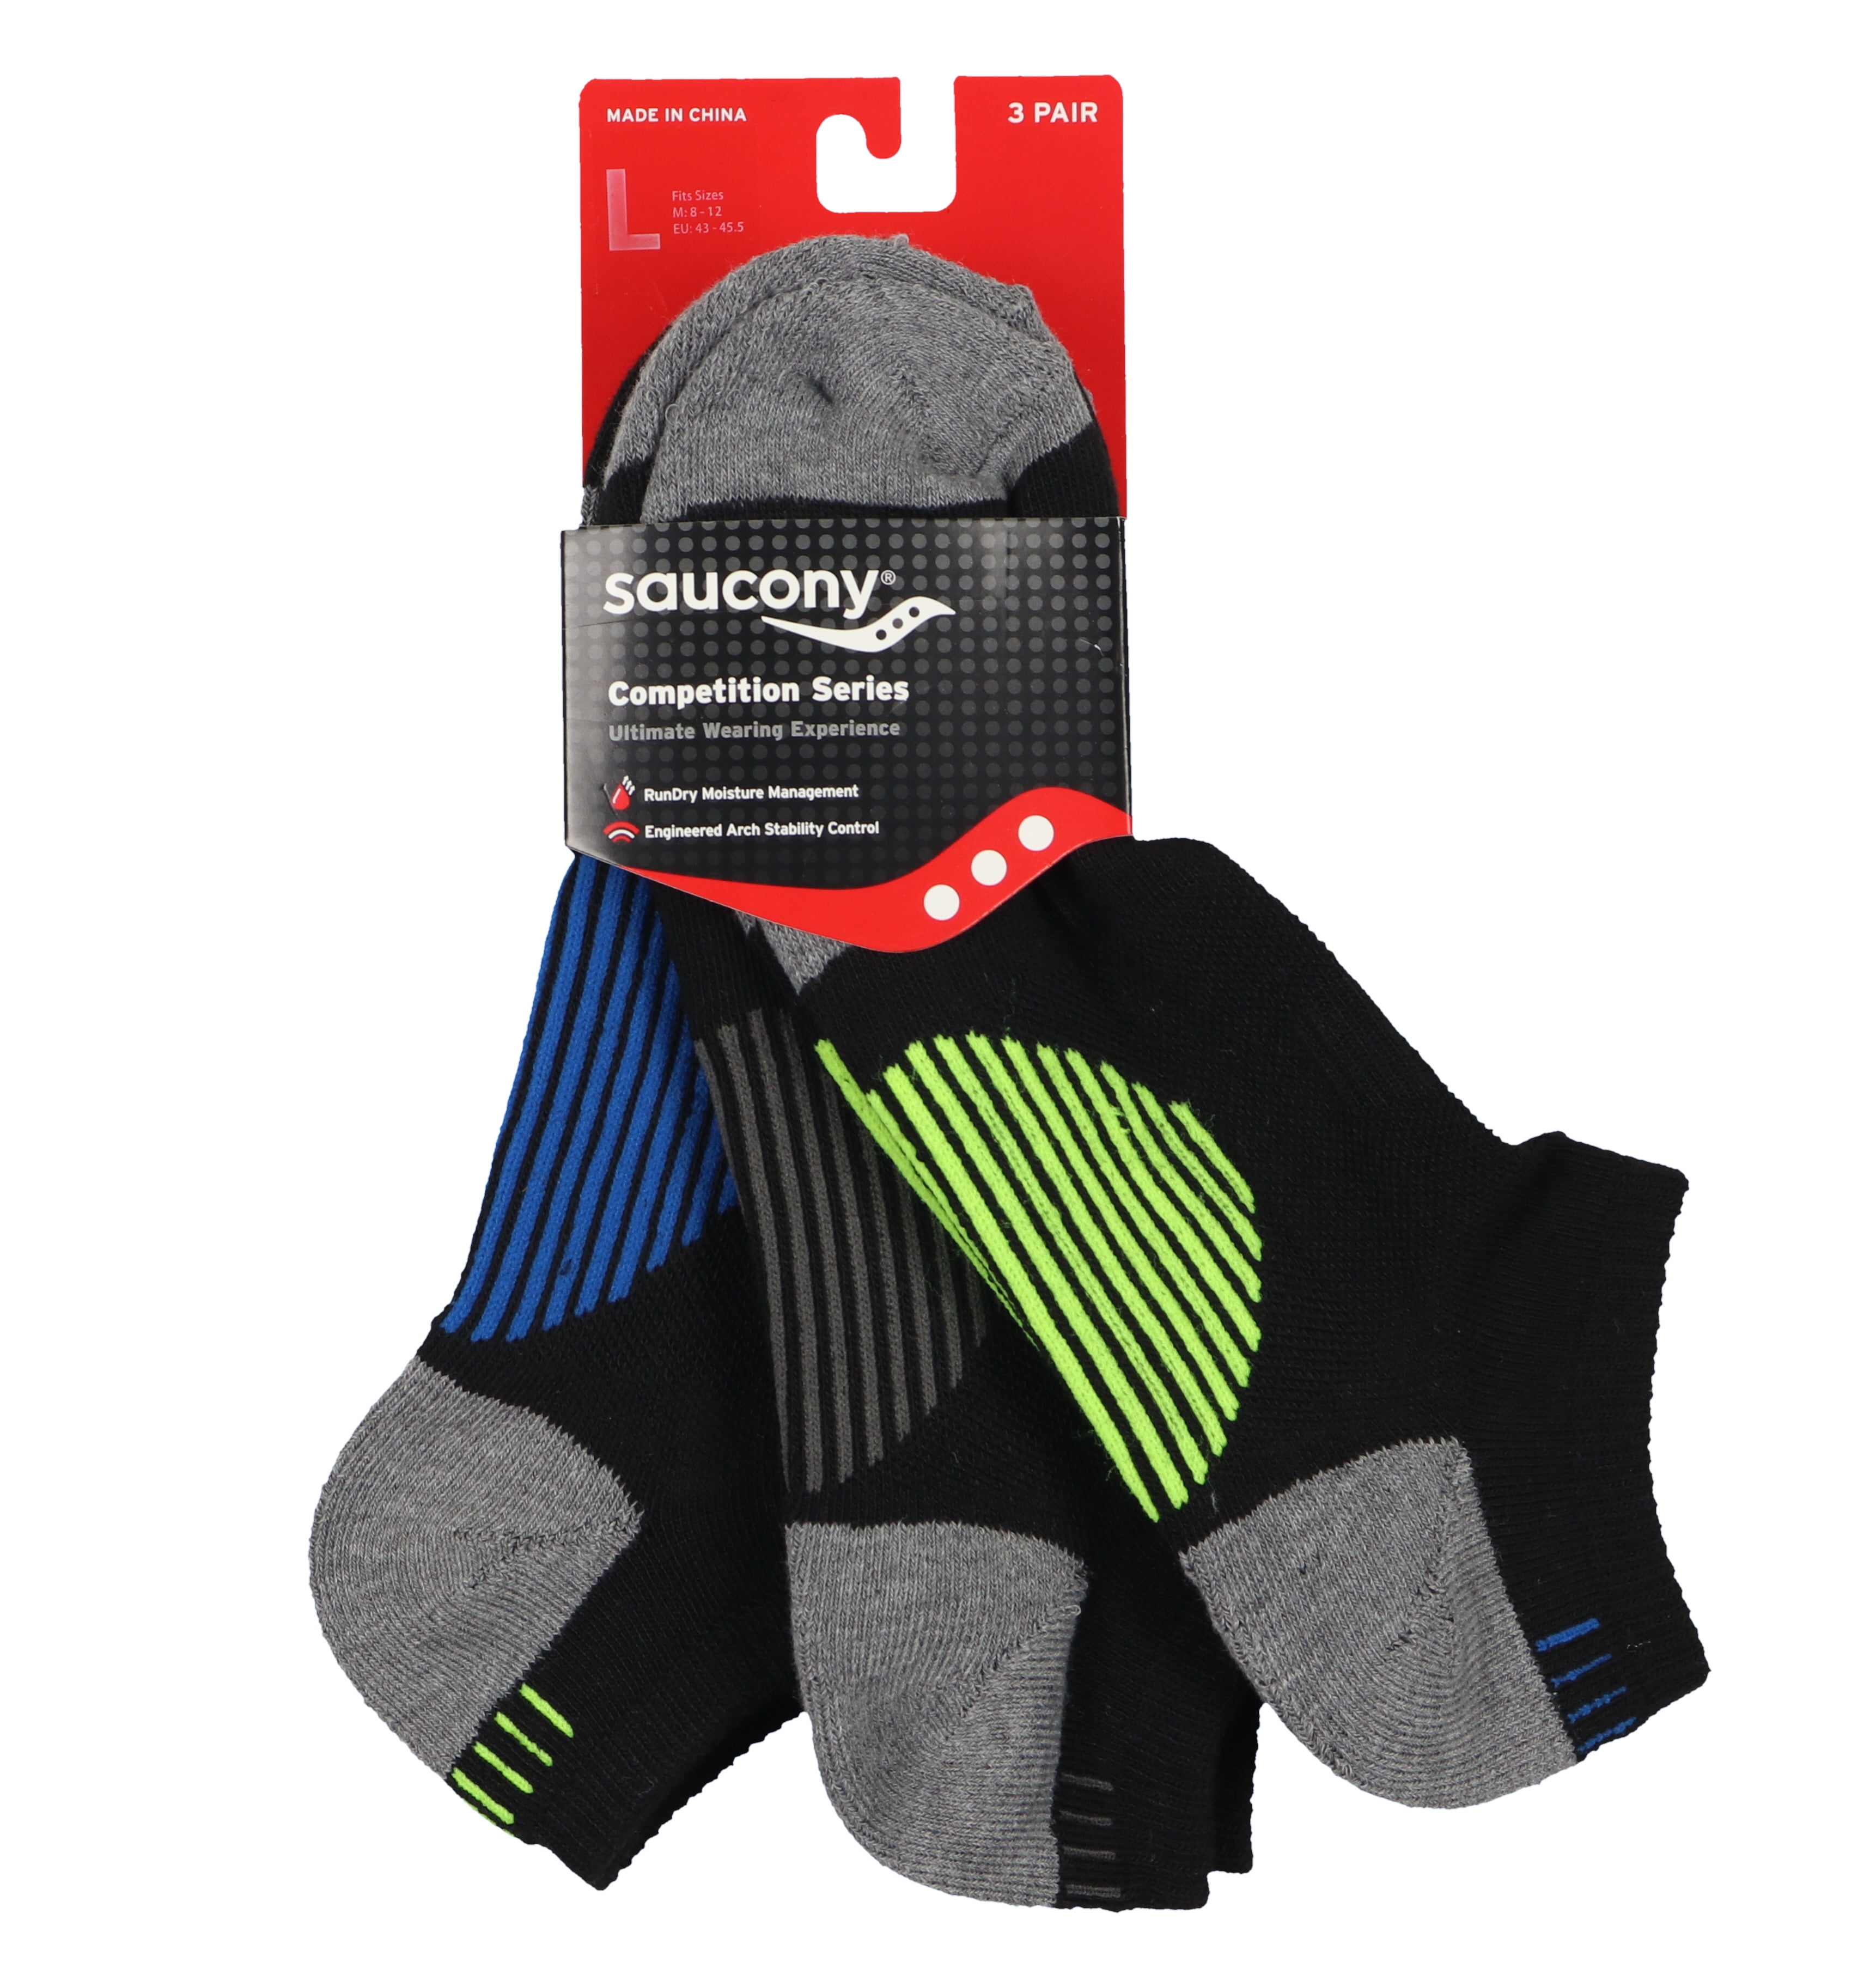 saucony competition series socks review